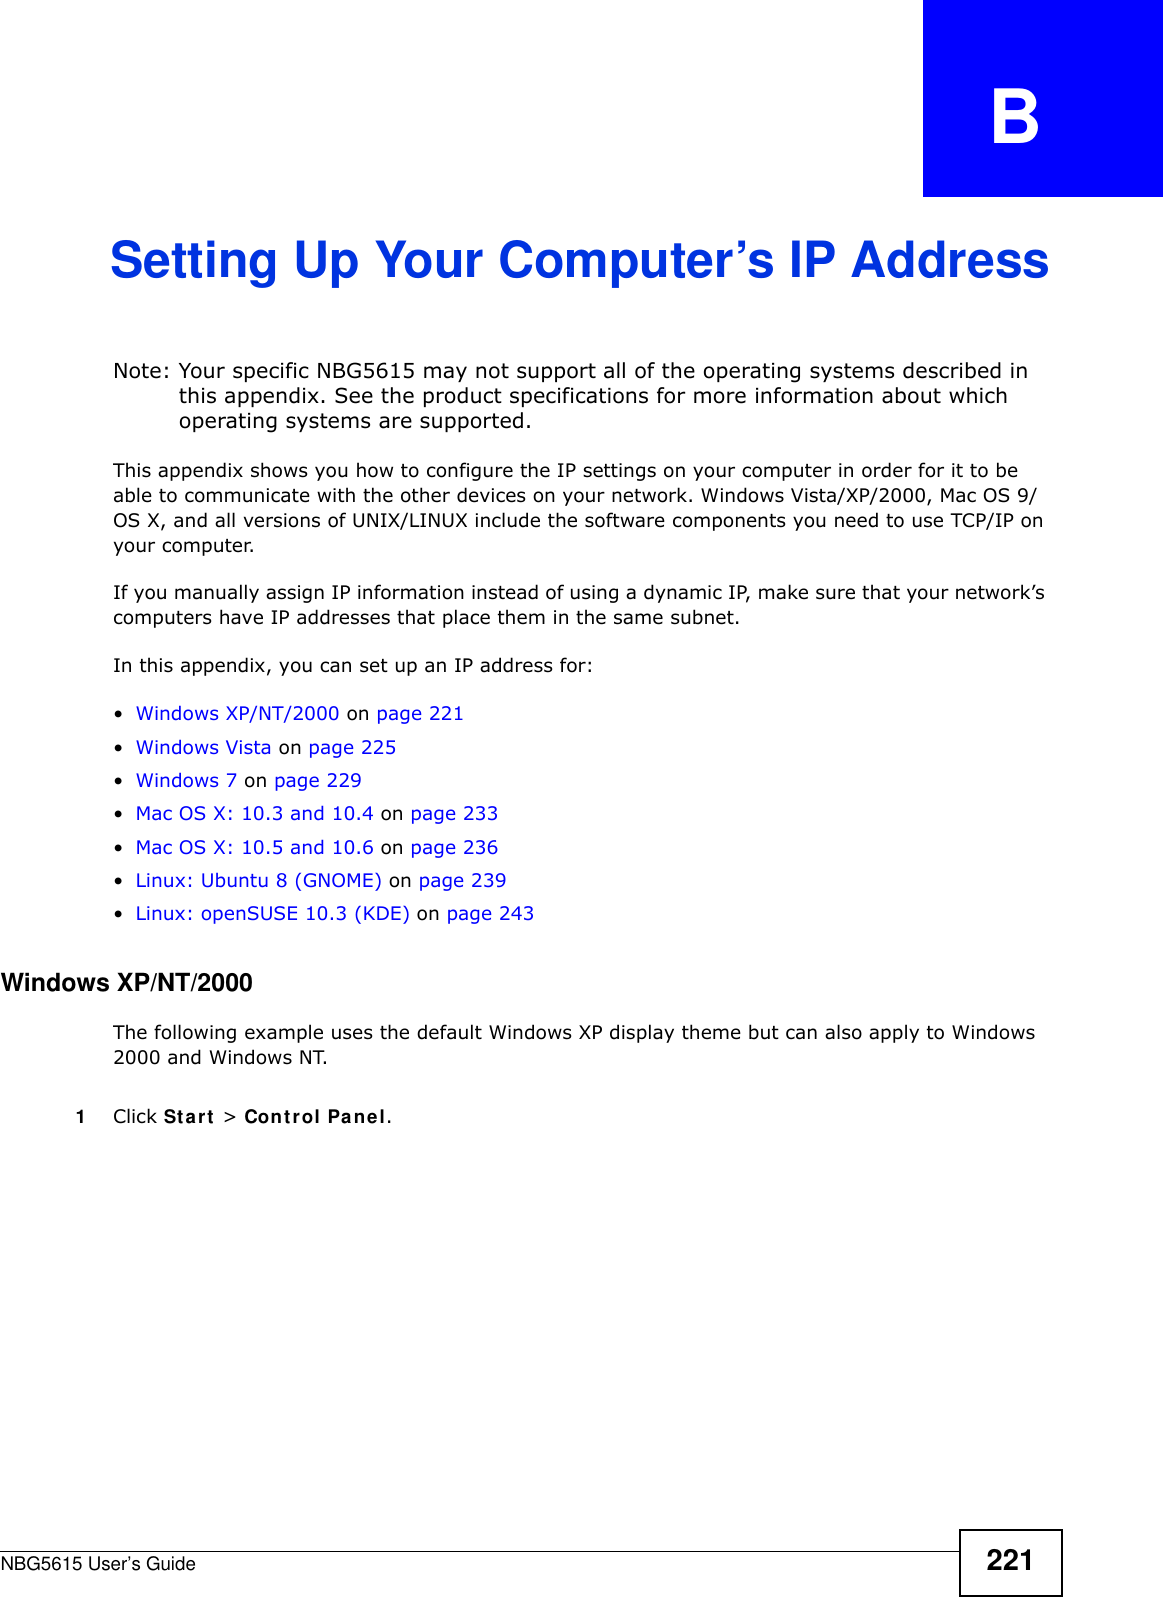 NBG5615 User’s Guide 221APPENDIX   BSetting Up Your Computer’s IP AddressNote: Your specific NBG5615 may not support all of the operating systems described in this appendix. See the product specifications for more information about which operating systems are supported.This appendix shows you how to configure the IP settings on your computer in order for it to be able to communicate with the other devices on your network. Windows Vista/XP/2000, Mac OS 9/OS X, and all versions of UNIX/LINUX include the software components you need to use TCP/IP on your computer. If you manually assign IP information instead of using a dynamic IP, make sure that your network’s computers have IP addresses that place them in the same subnet.In this appendix, you can set up an IP address for:•Windows XP/NT/2000 on page 221•Windows Vista on page 225•Windows 7 on page 229•Mac OS X: 10.3 and 10.4 on page 233•Mac OS X: 10.5 and 10.6 on page 236•Linux: Ubuntu 8 (GNOME) on page 239•Linux: openSUSE 10.3 (KDE) on page 243Windows XP/NT/2000The following example uses the default Windows XP display theme but can also apply to Windows 2000 and Windows NT.1Click Start &gt; Control Panel.